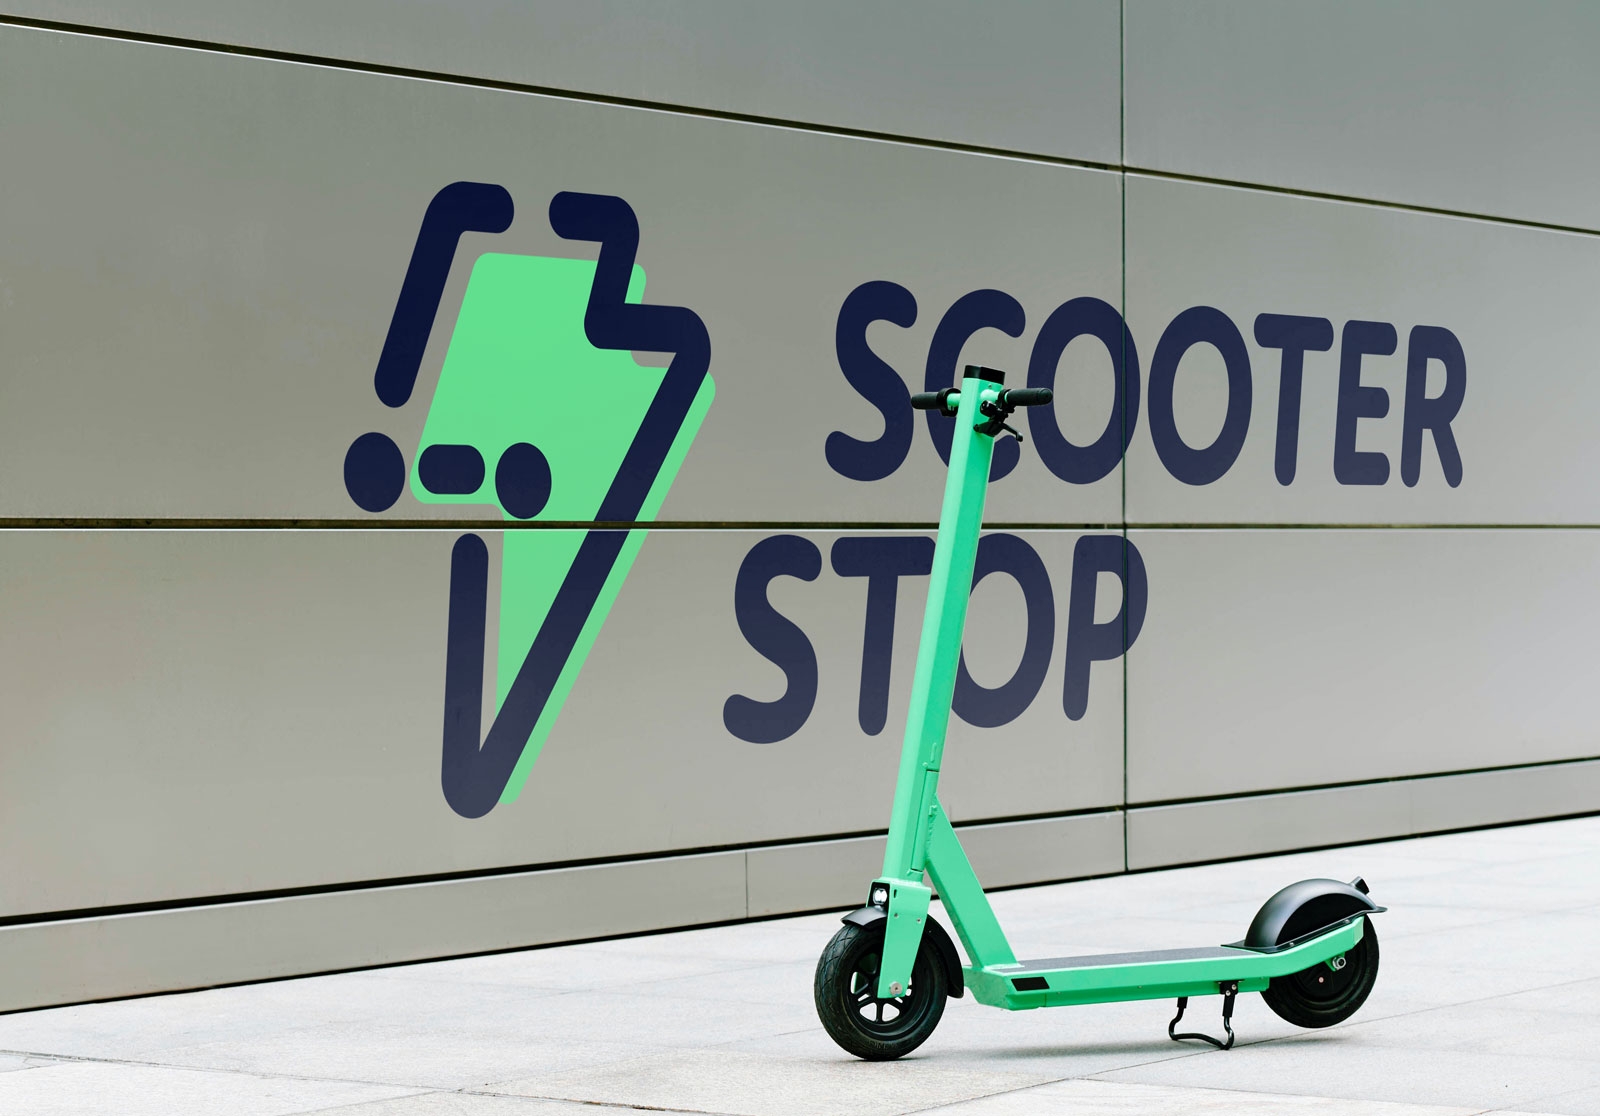 E-Scooter brand identity on wall